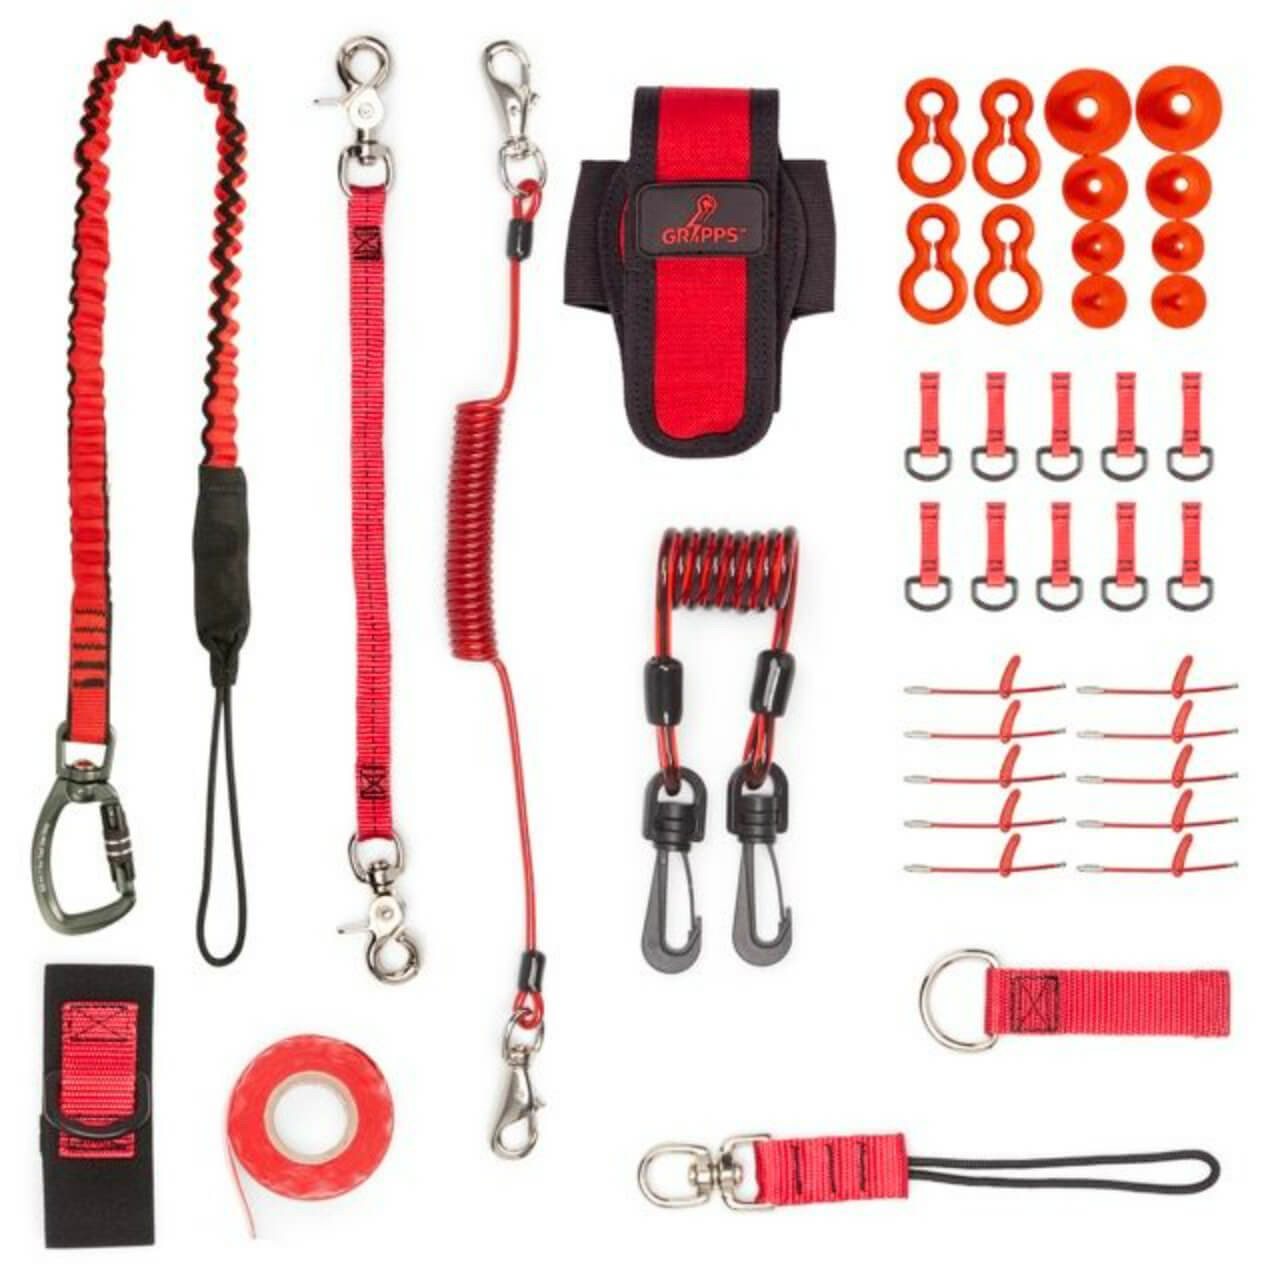 GRIPPS Electrical Trade Kit